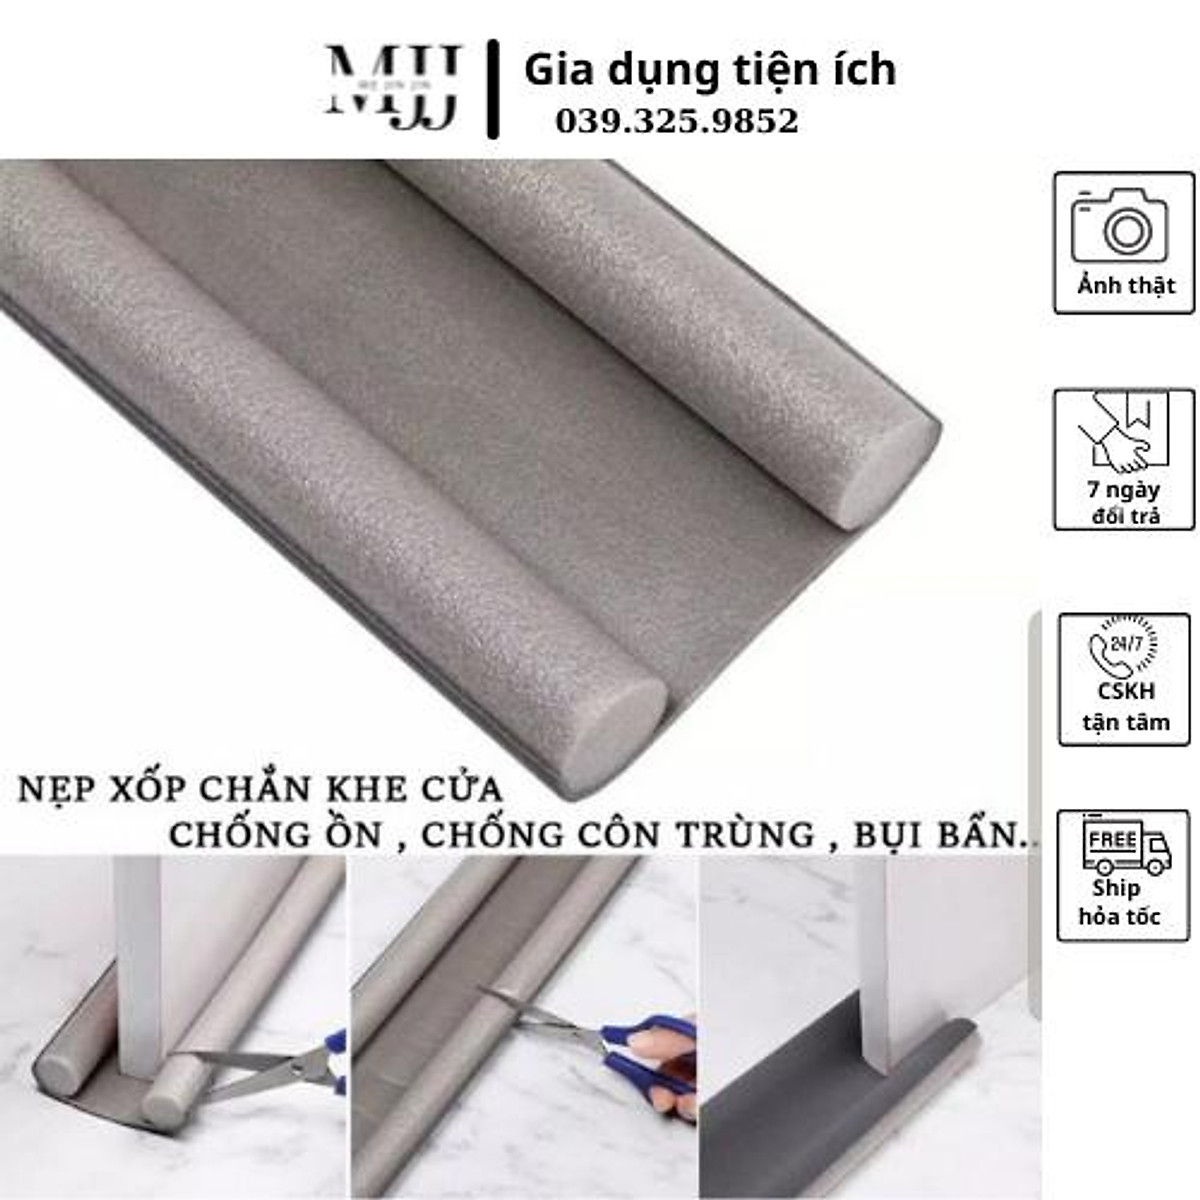 Not only does it have great soundproofing ability, it also provides good insulation to reduce energy consumption. Moreover, this material is also easy to install and maintain. Click on the related image to learn more details.